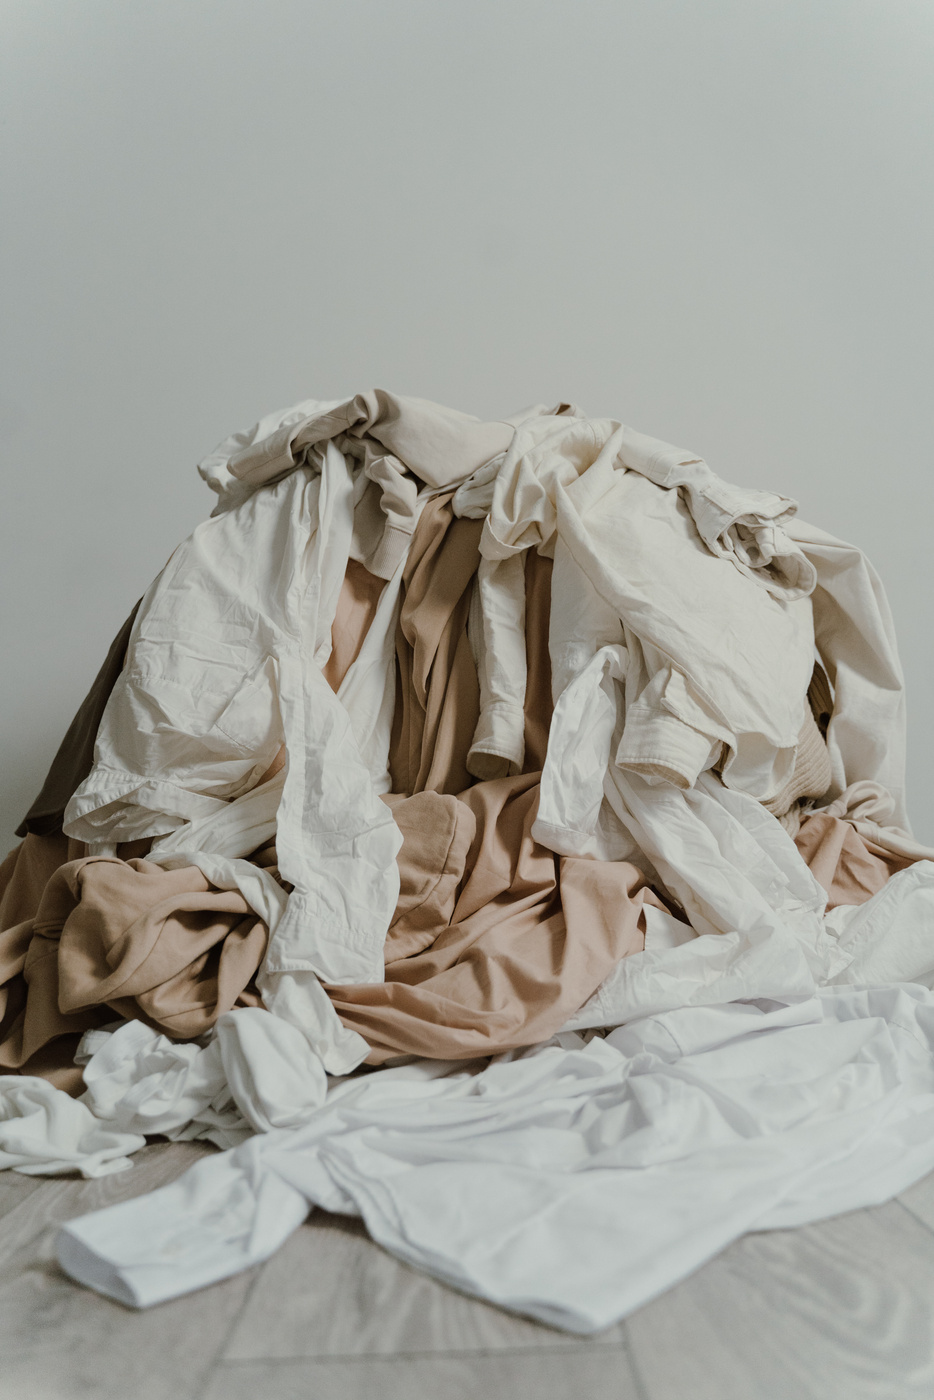 Heap of Clothes and Fabric 